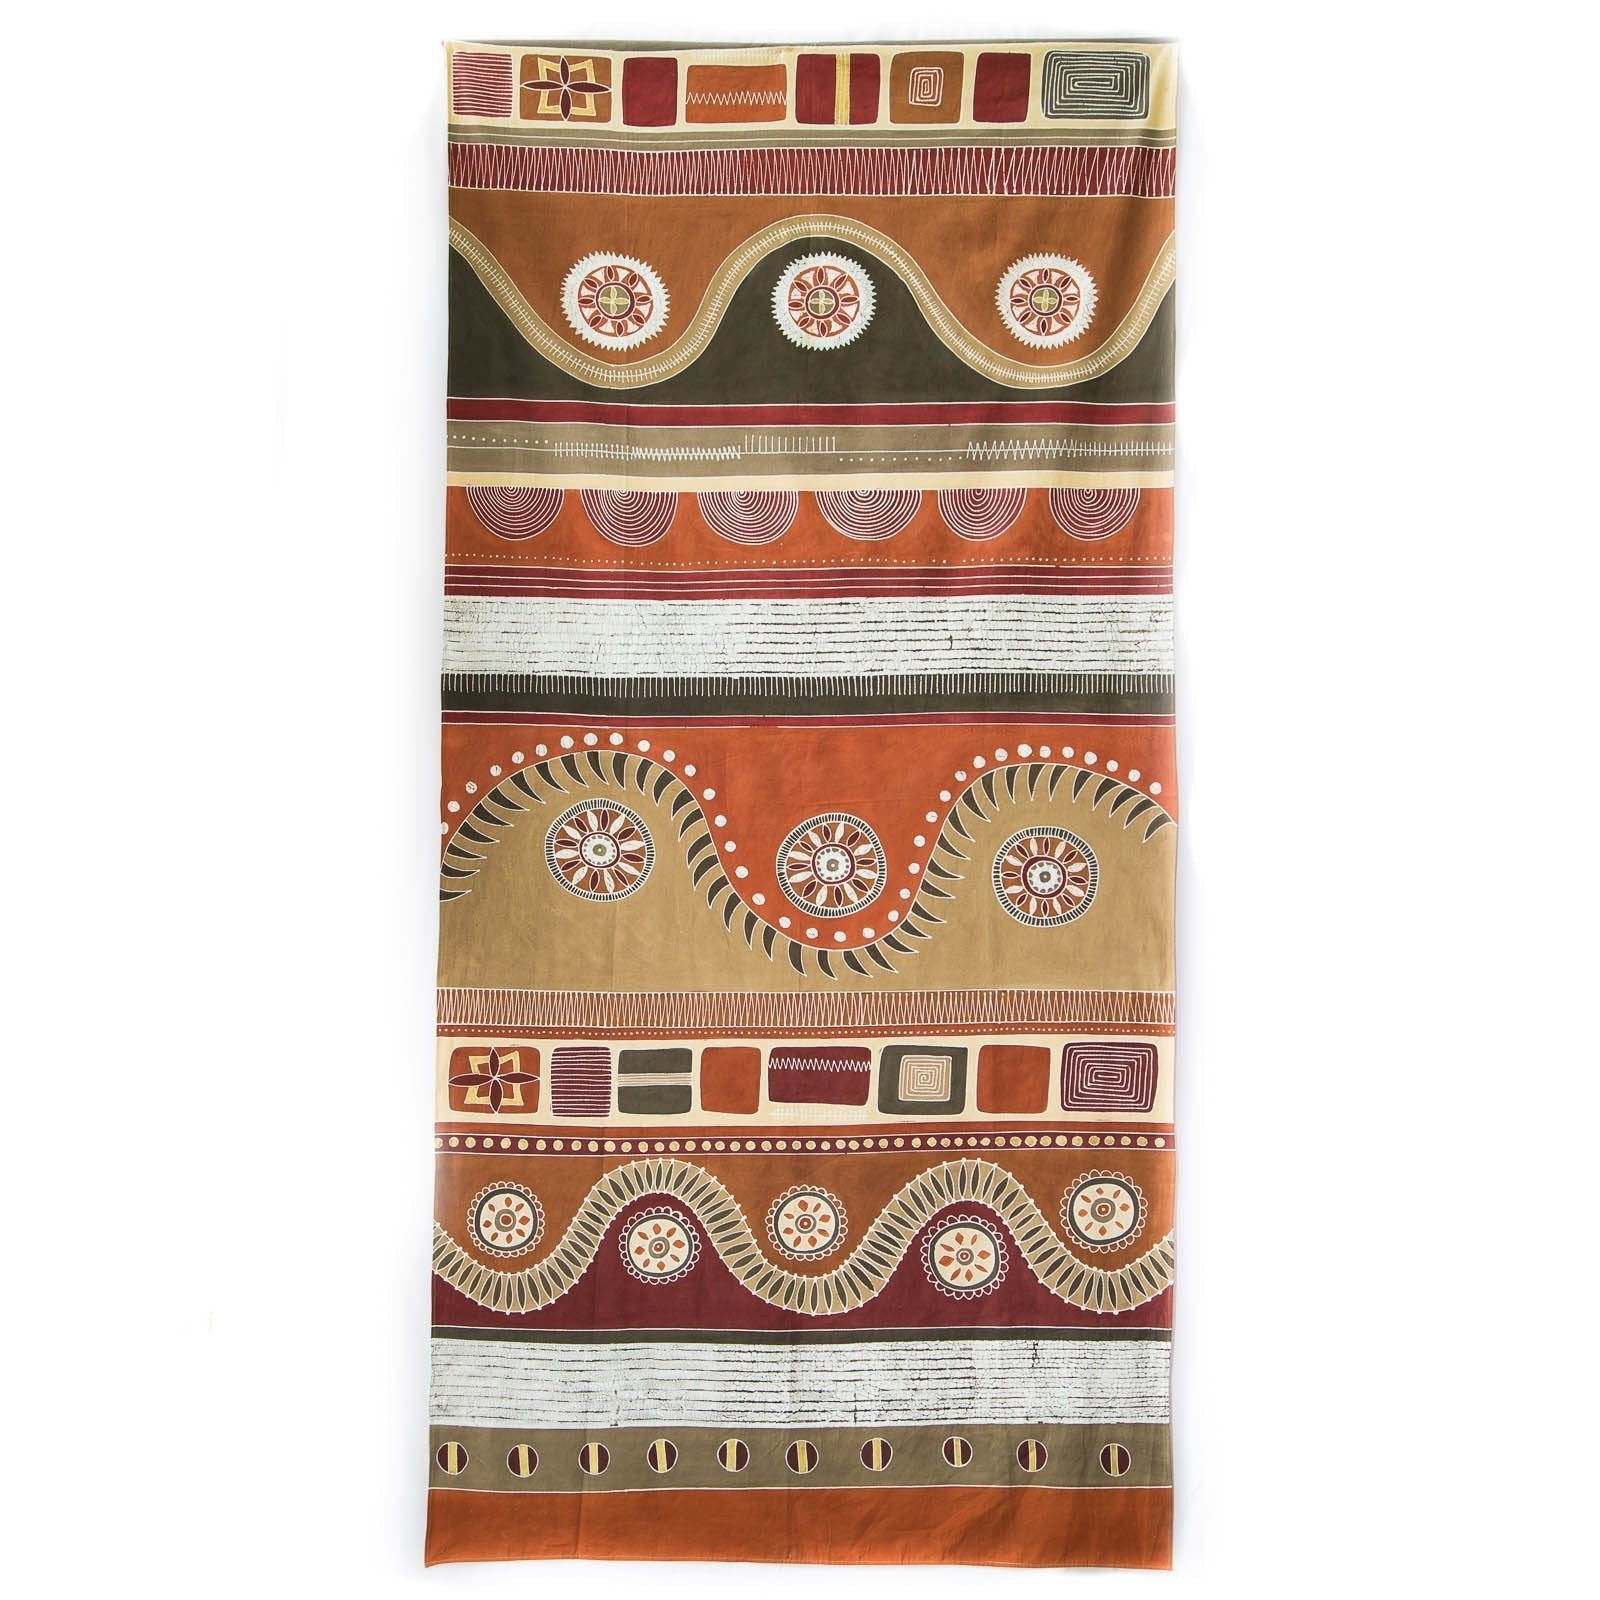 Mali Sienna Tablecloth - Handmade by TRIBAL TEXTILES - Handcrafted Home Decor Interiors - African Made